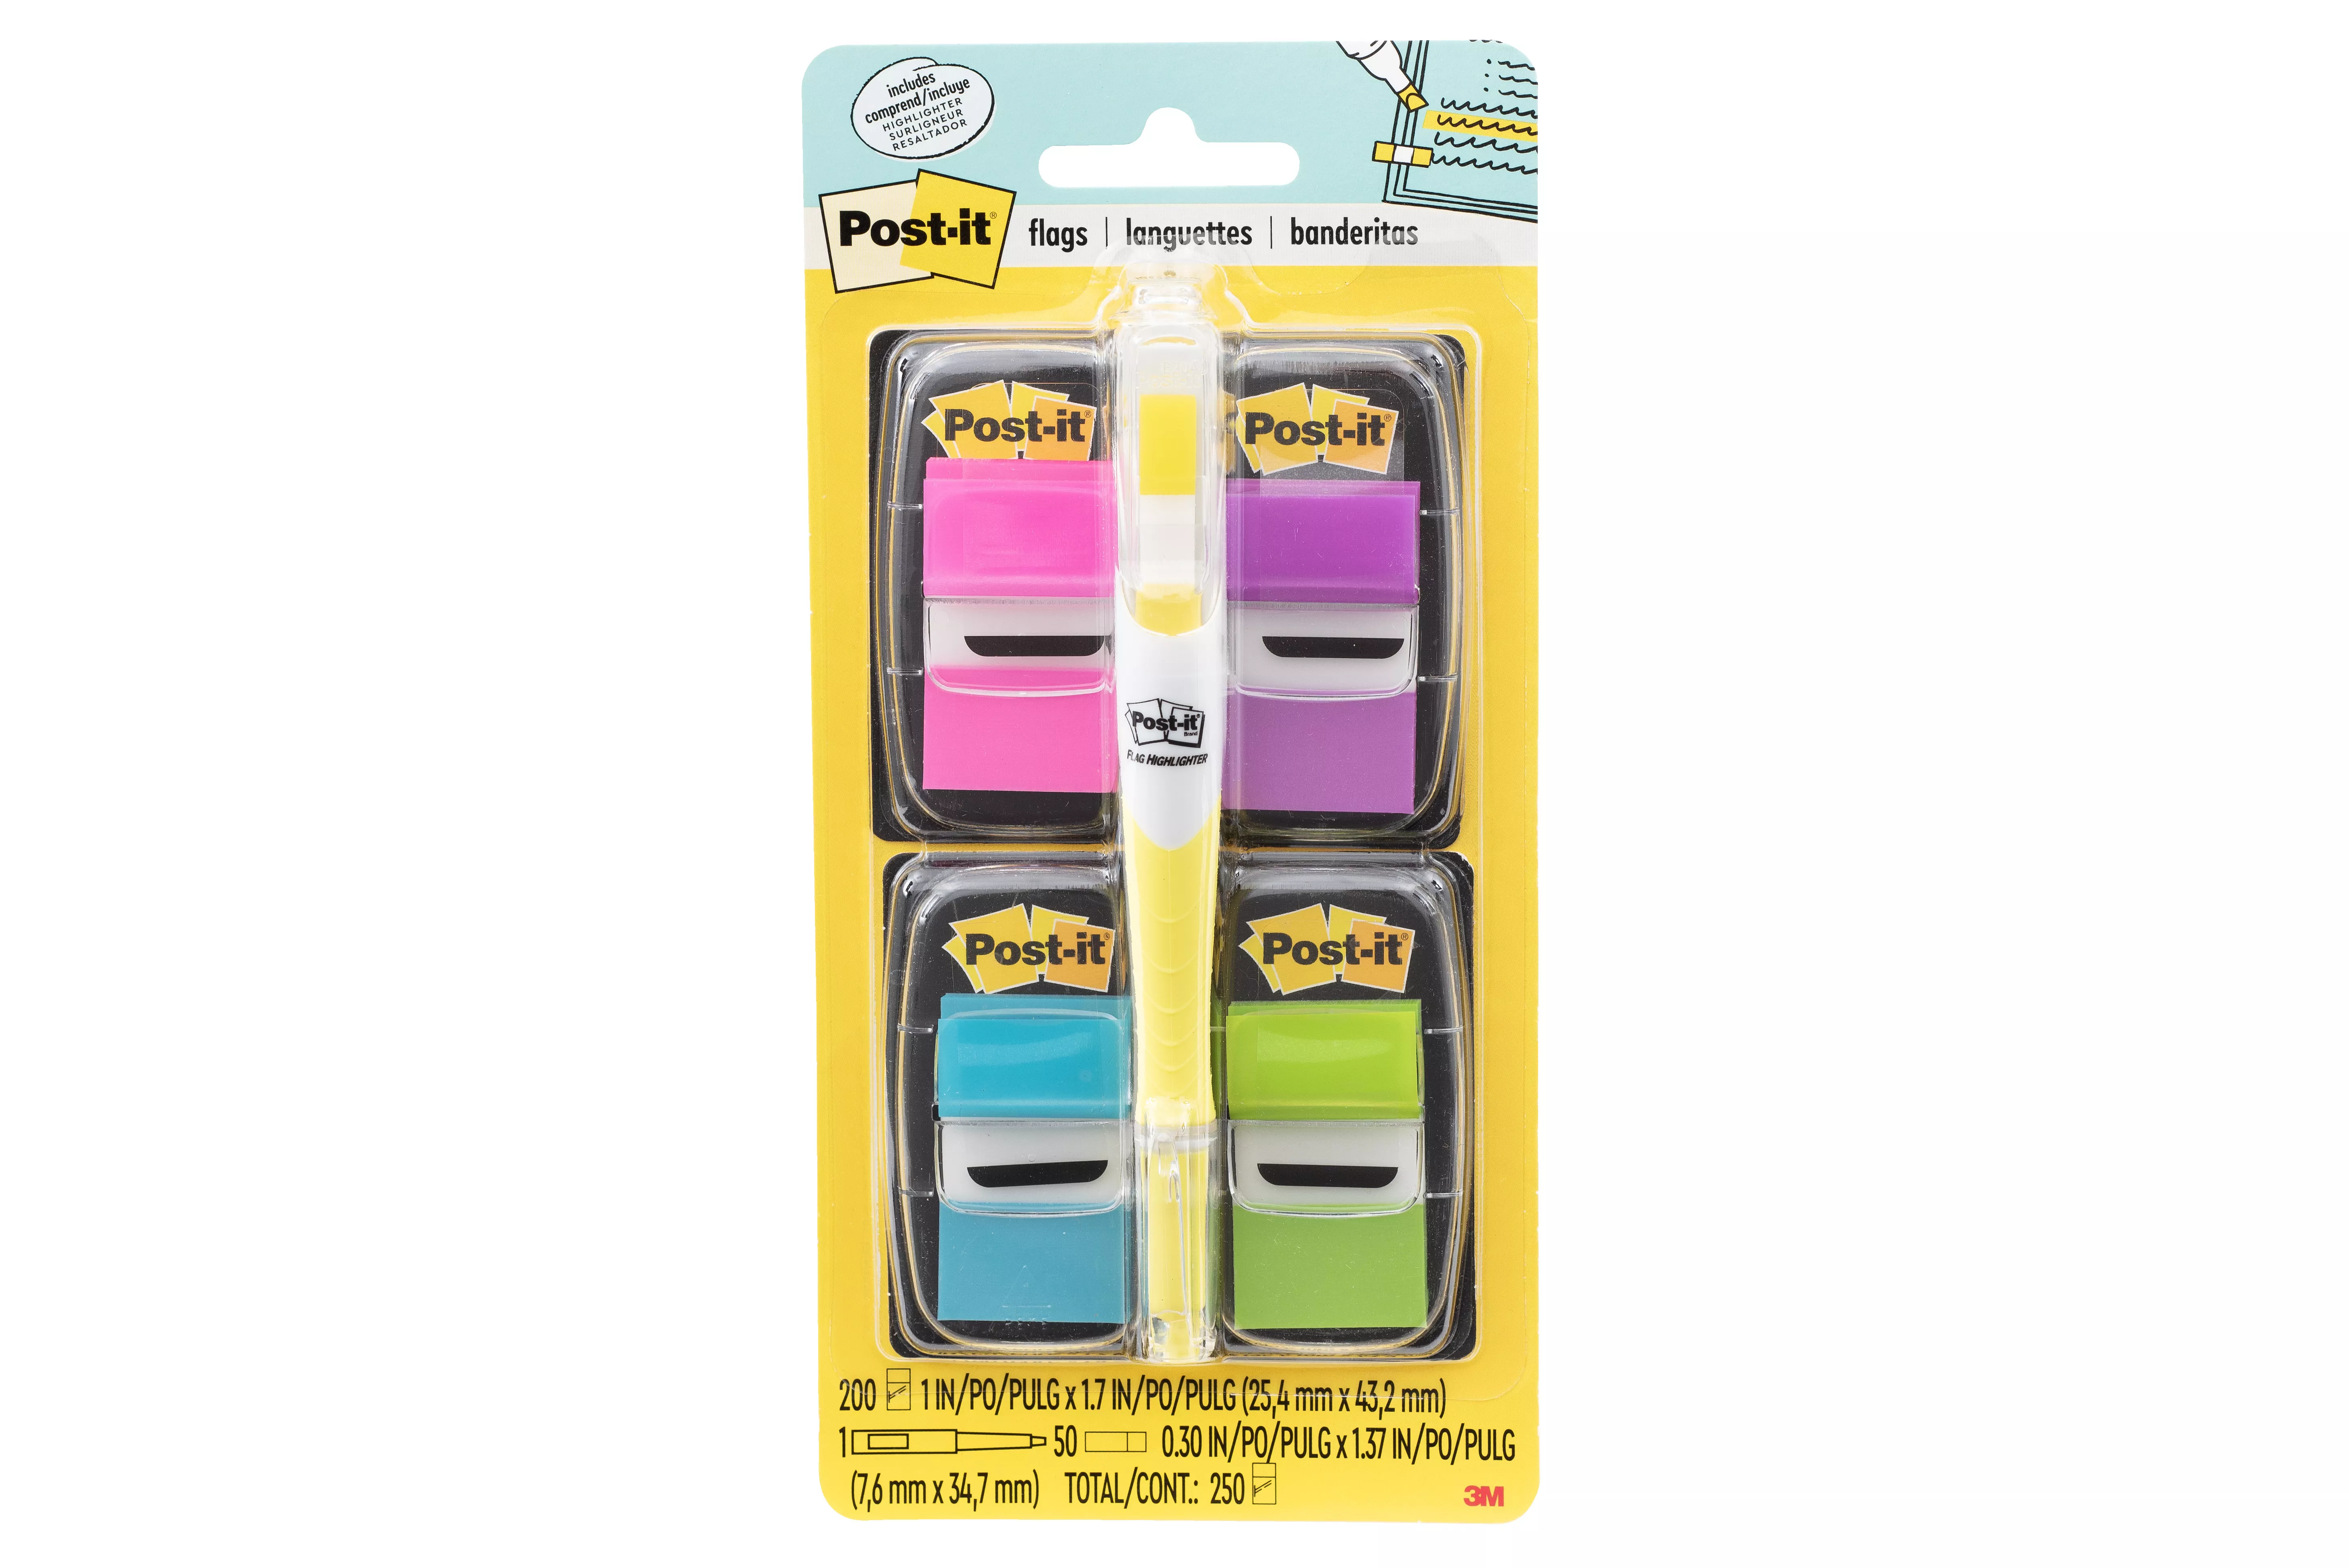 Post-it® Flags 680-PPBGVA, 1 in. x 1.7 in. (25,4 mm x 43,2 mm) Assorted
200 flags pack